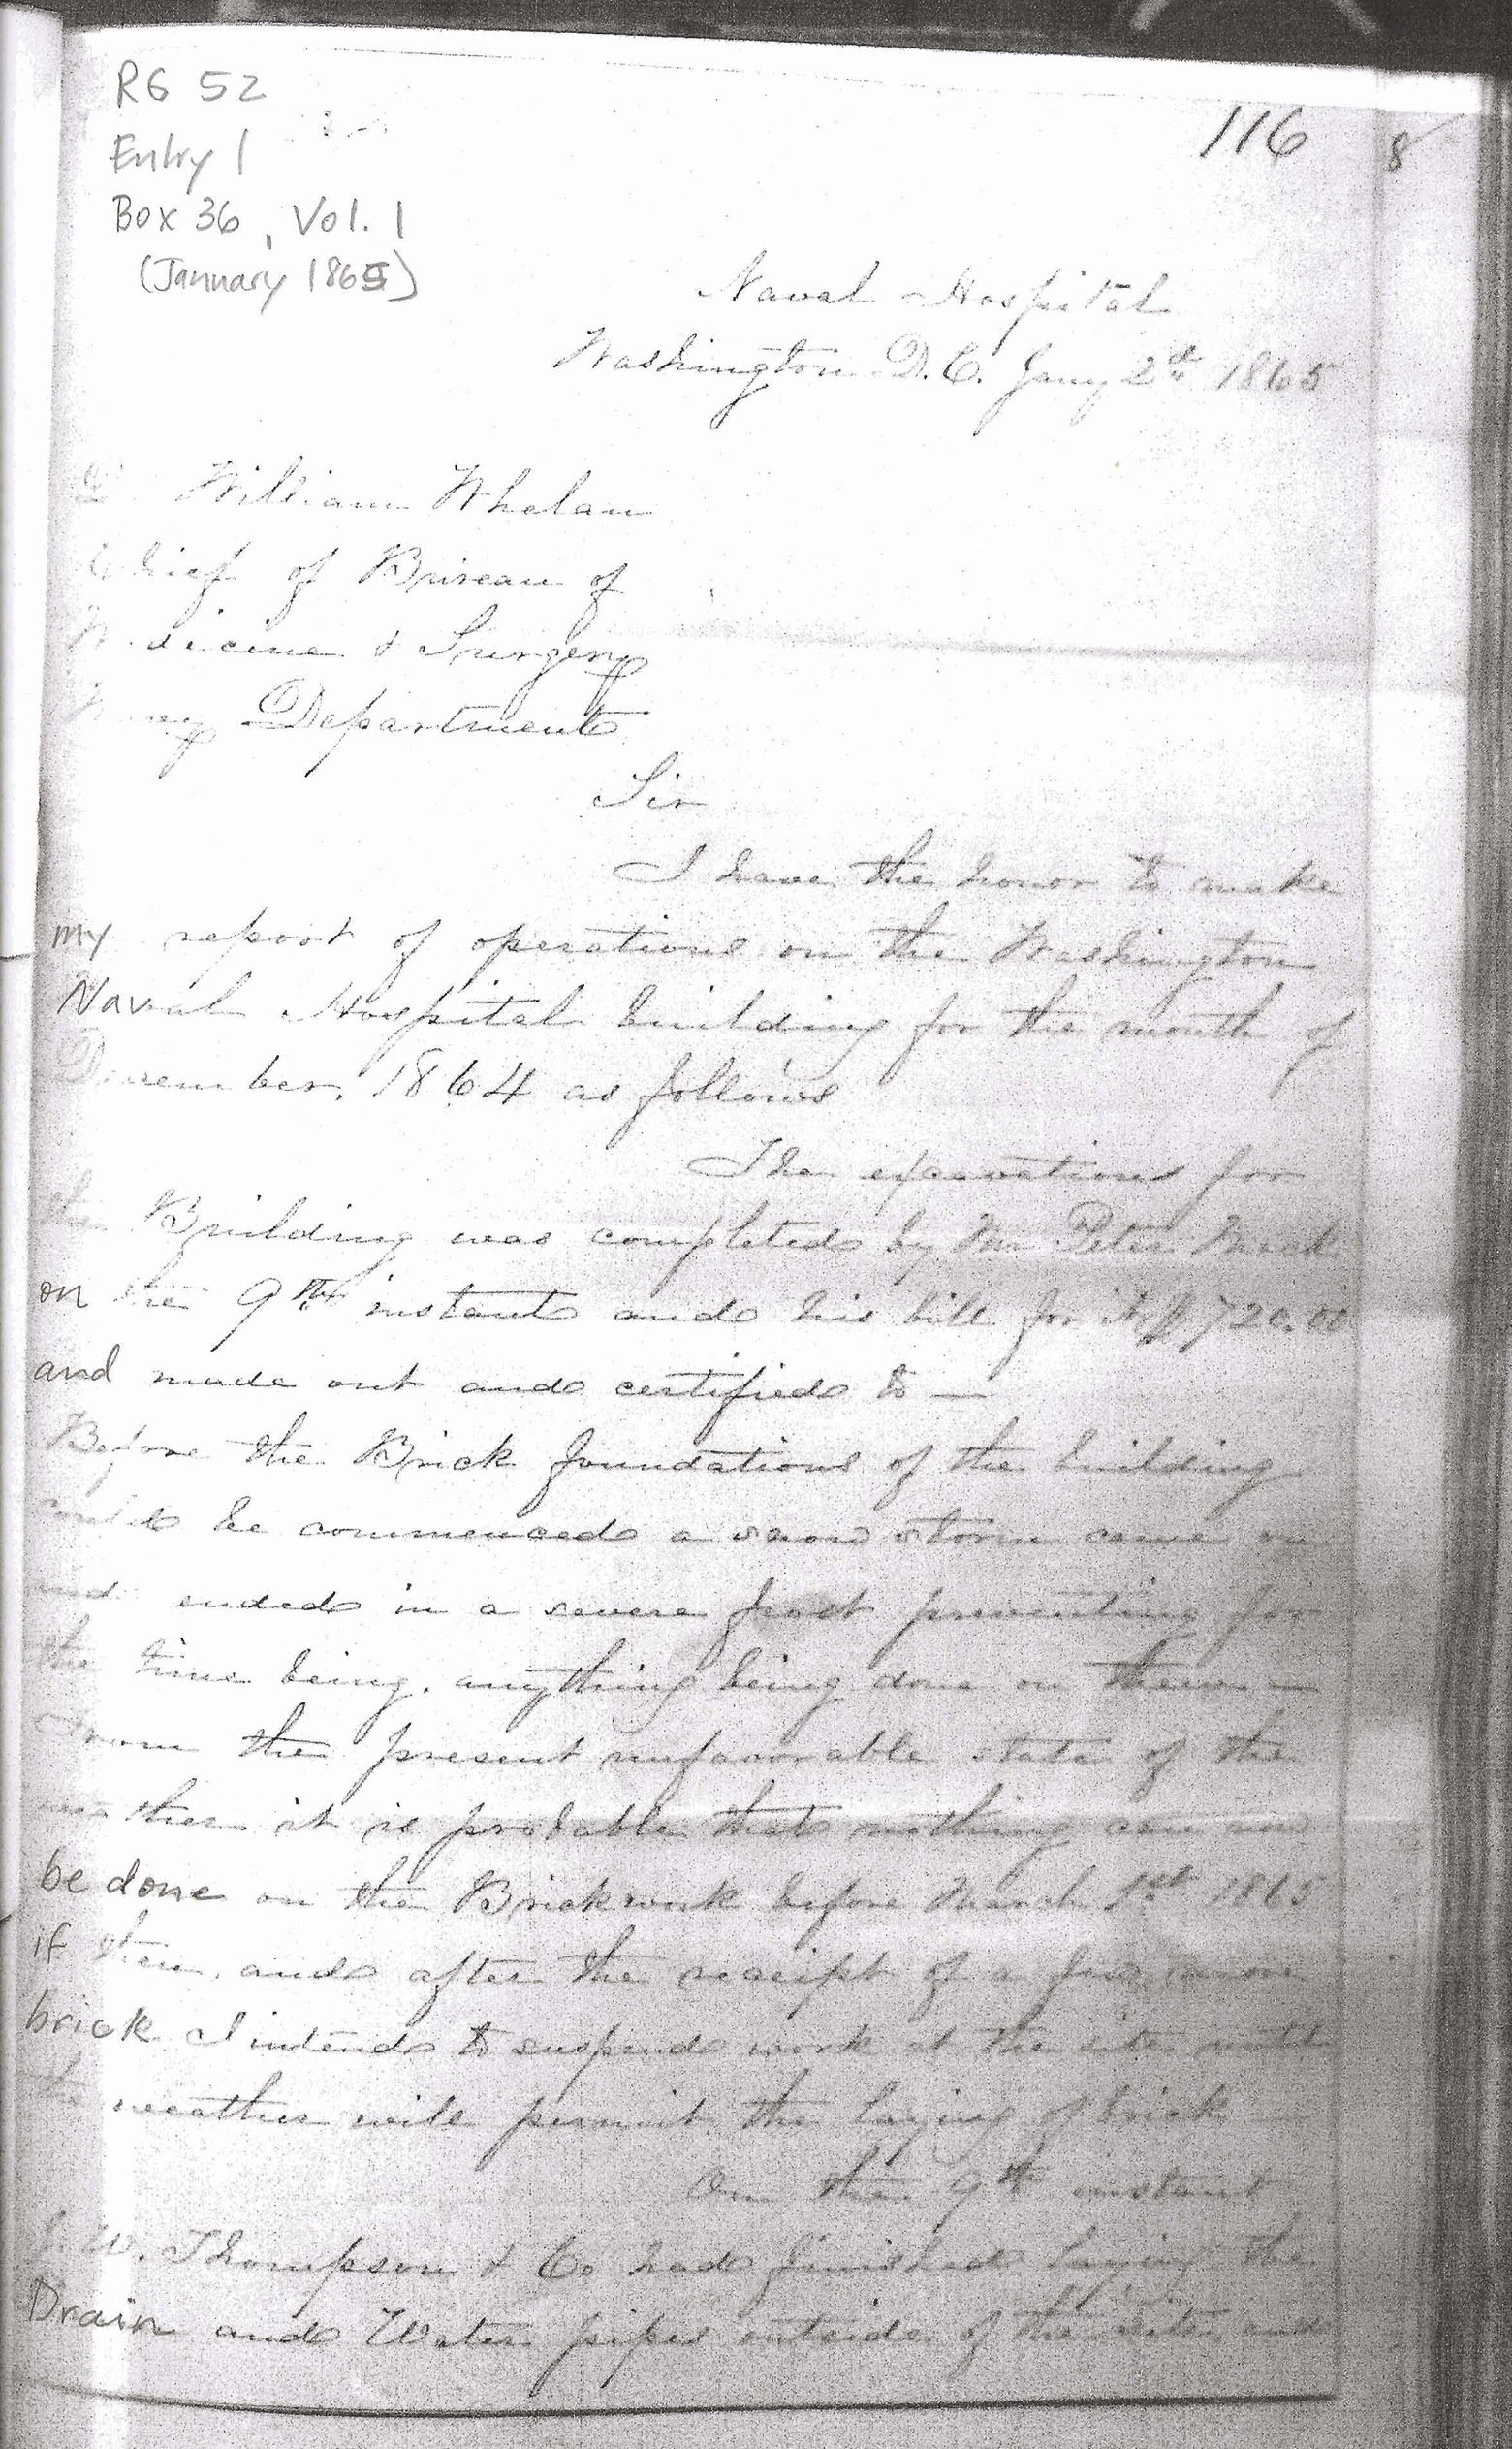 Monthly Report of the Supeintendent of Construction, January 2, 1865, Page 1 of 4